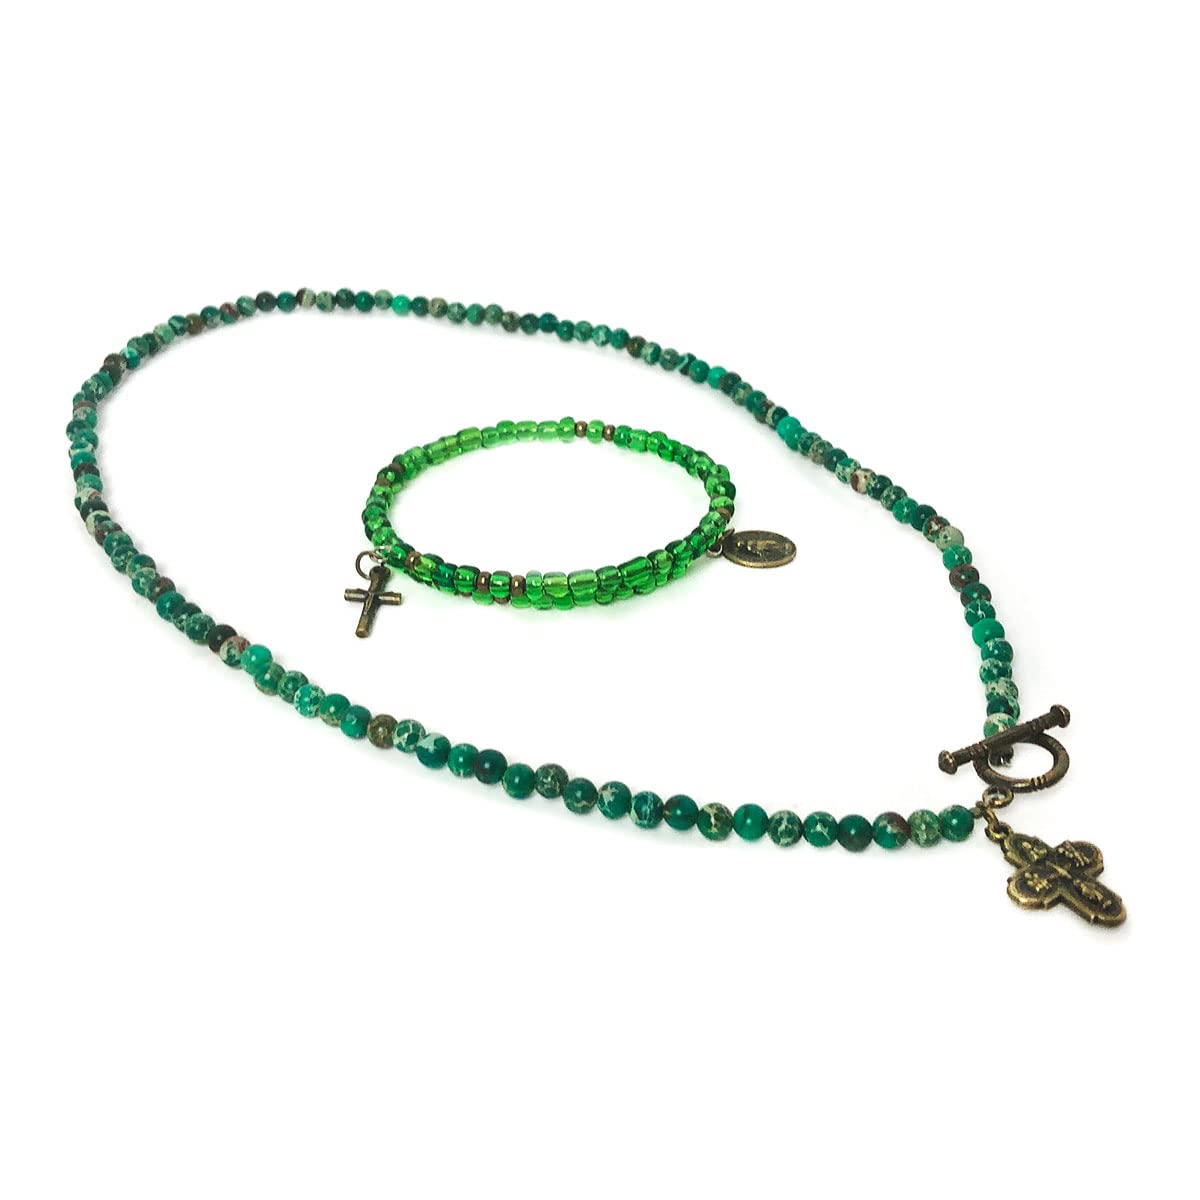 Four Way Medal Green Sandstone Front Toggle Clasp Necklace and Rosary Bracelet Set by DALIA LORRAINE